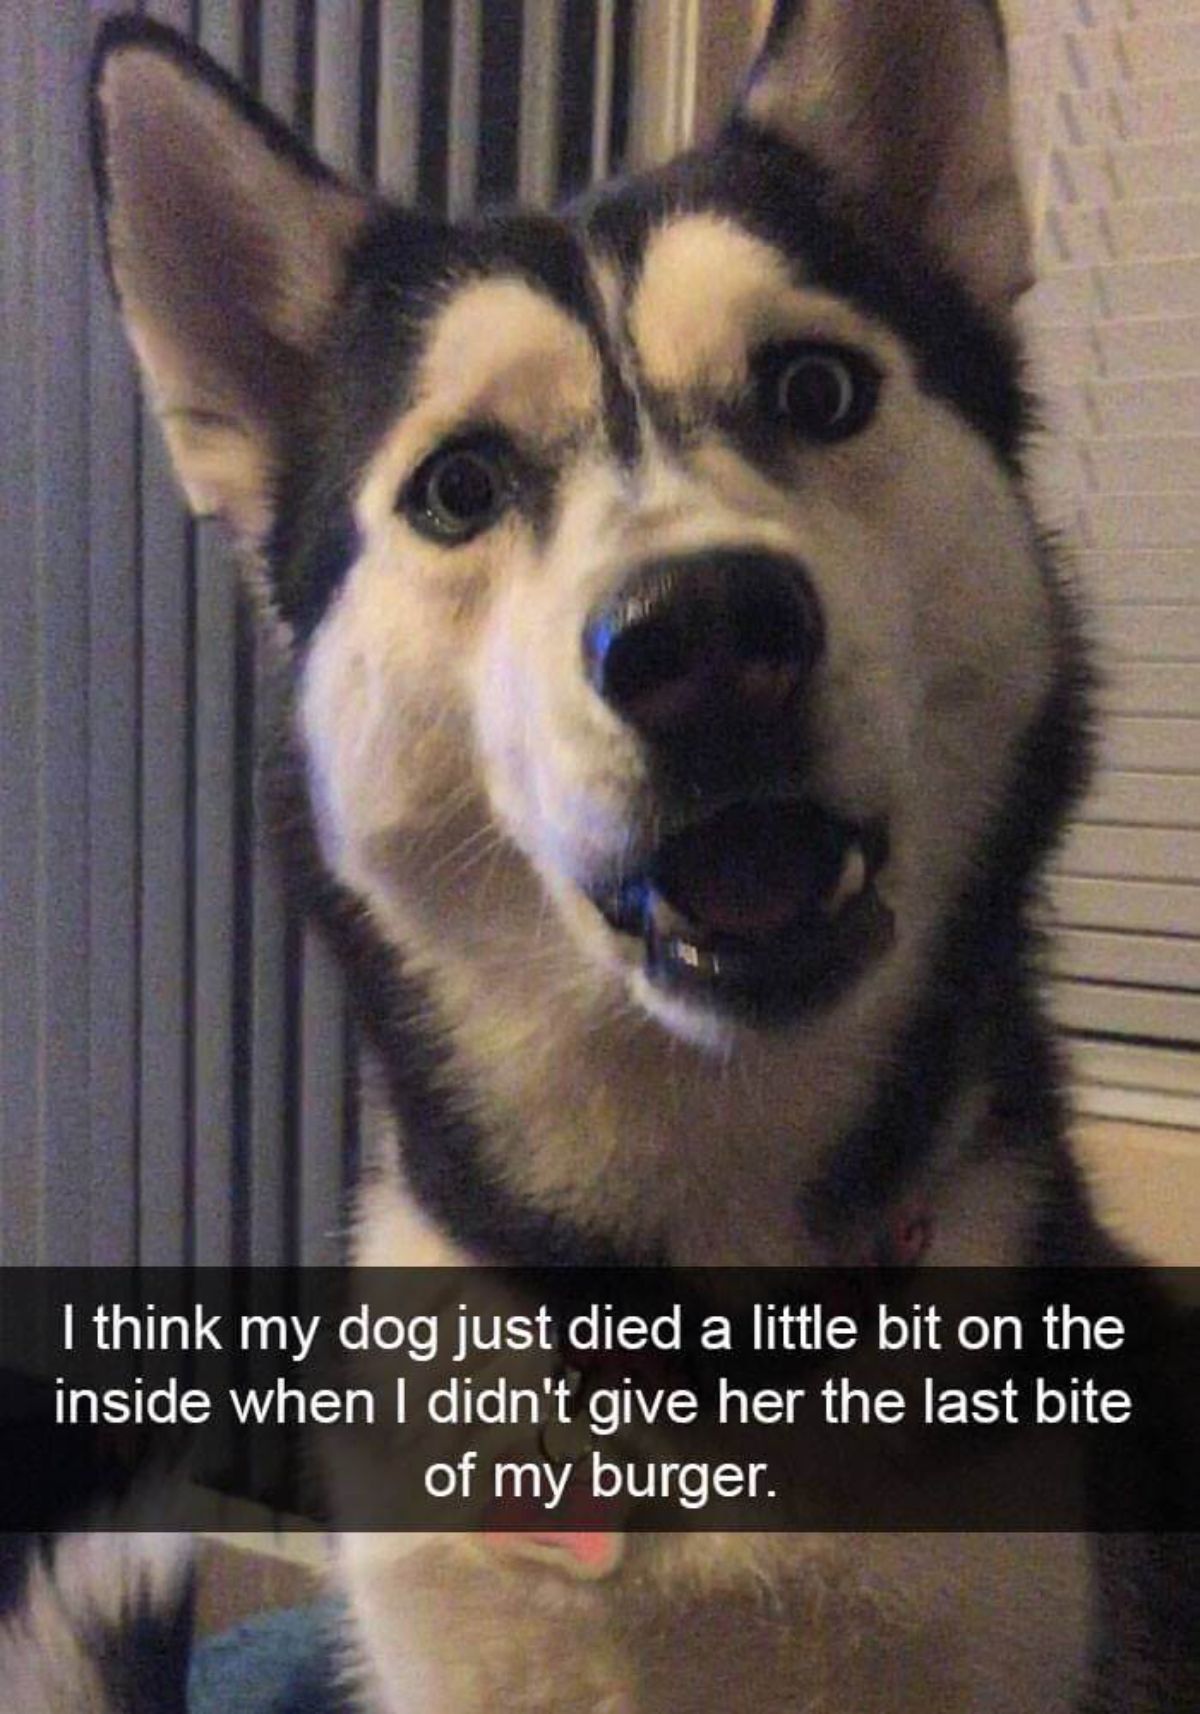 black and white husky looking at the camera with its mouth open in surprise with a caption saying i think my dog just died a little bit on the inside when i didn't give her the last bite